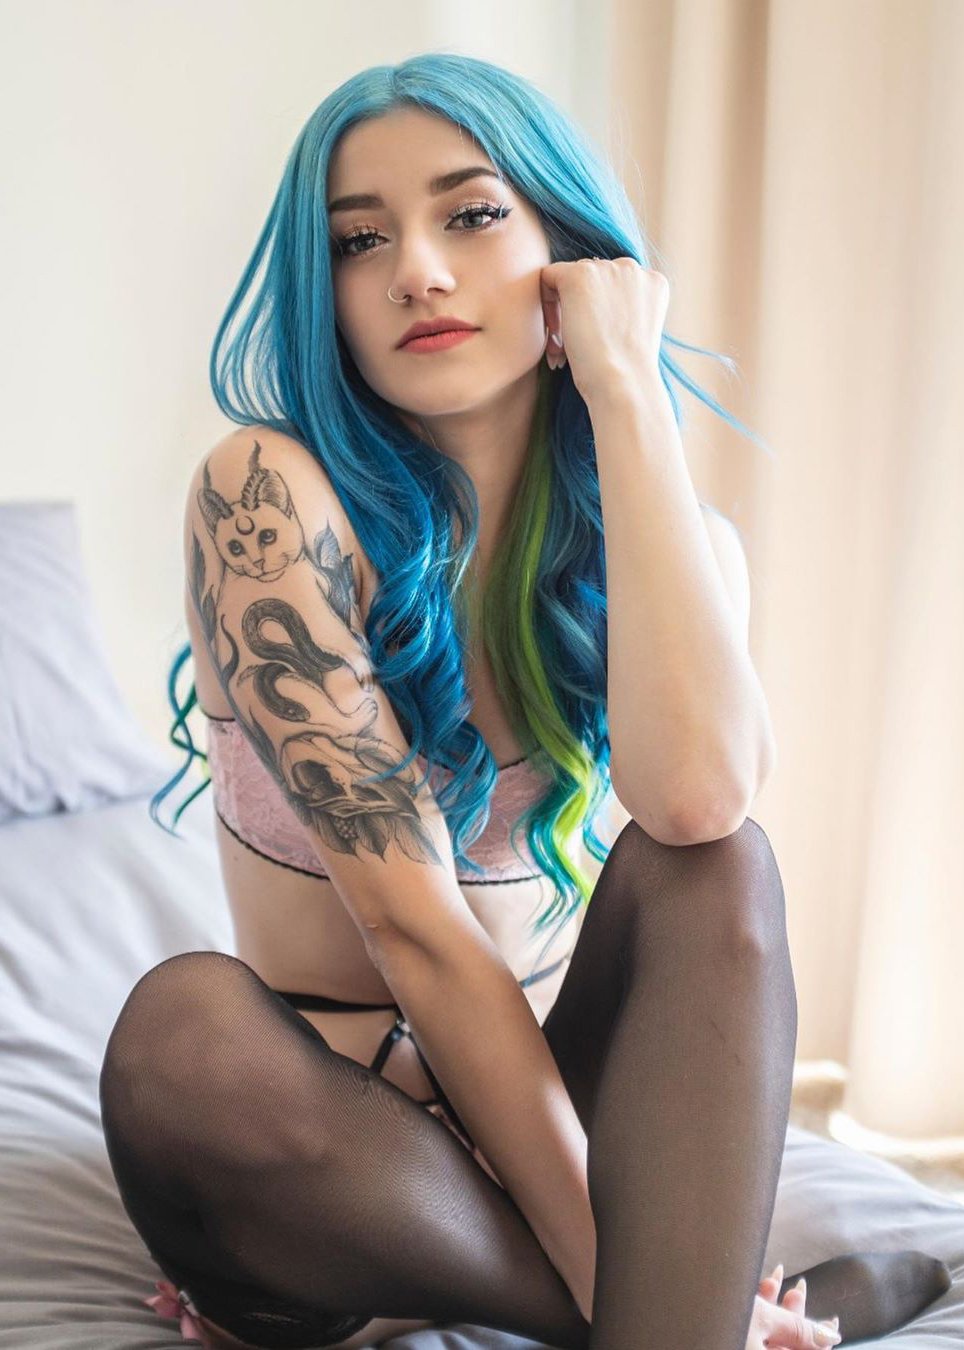 Suicide Girl Free Gallery